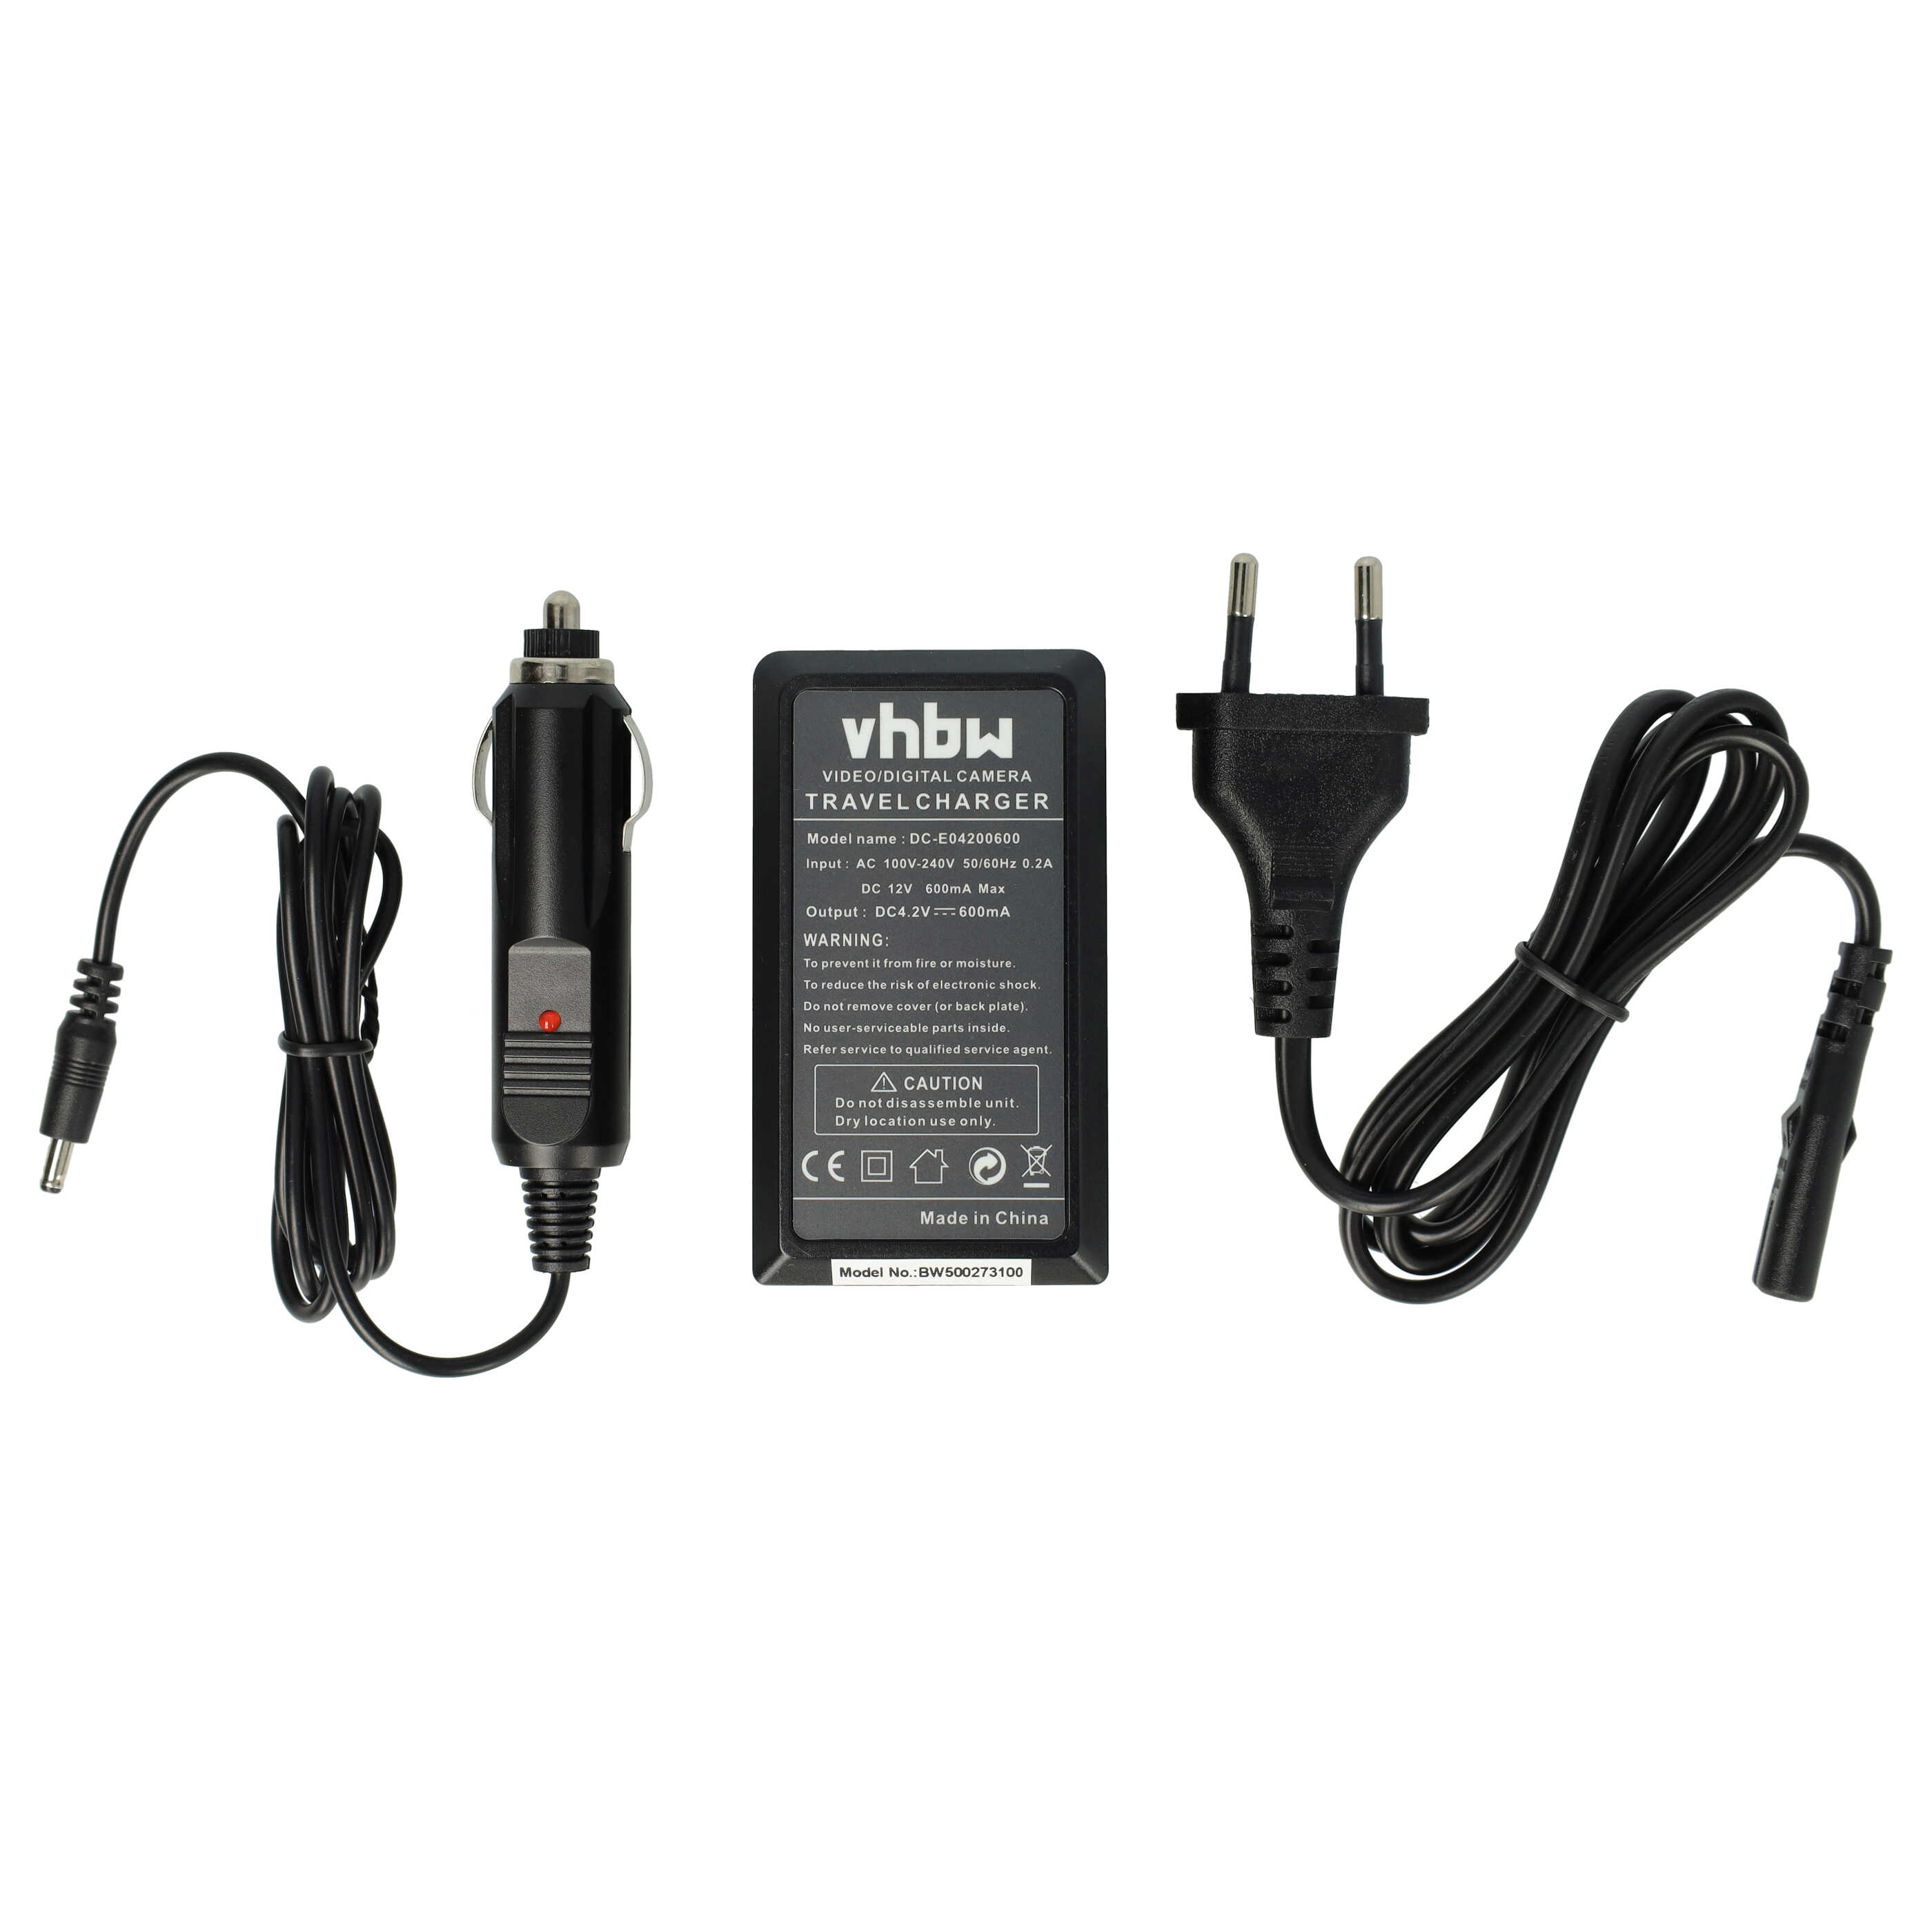 Battery Charger suitable for Sanyo DB-L10 Camera etc. - 0.6 A, 4.2 V